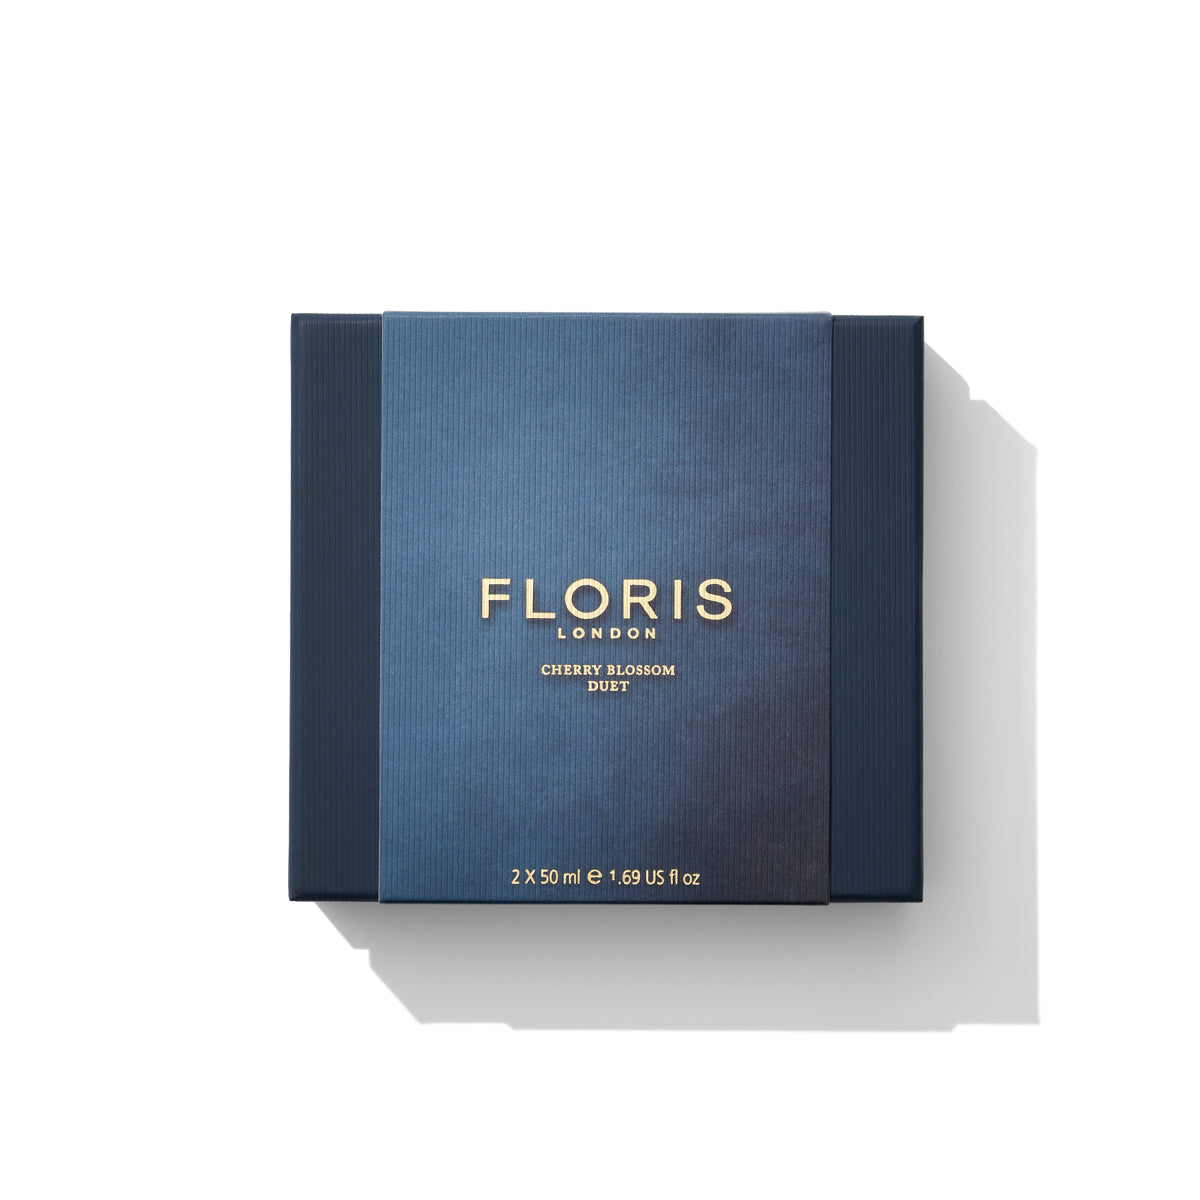 A blue box with blue sleeve showing 'Cherry Blossom Duet' by Floris